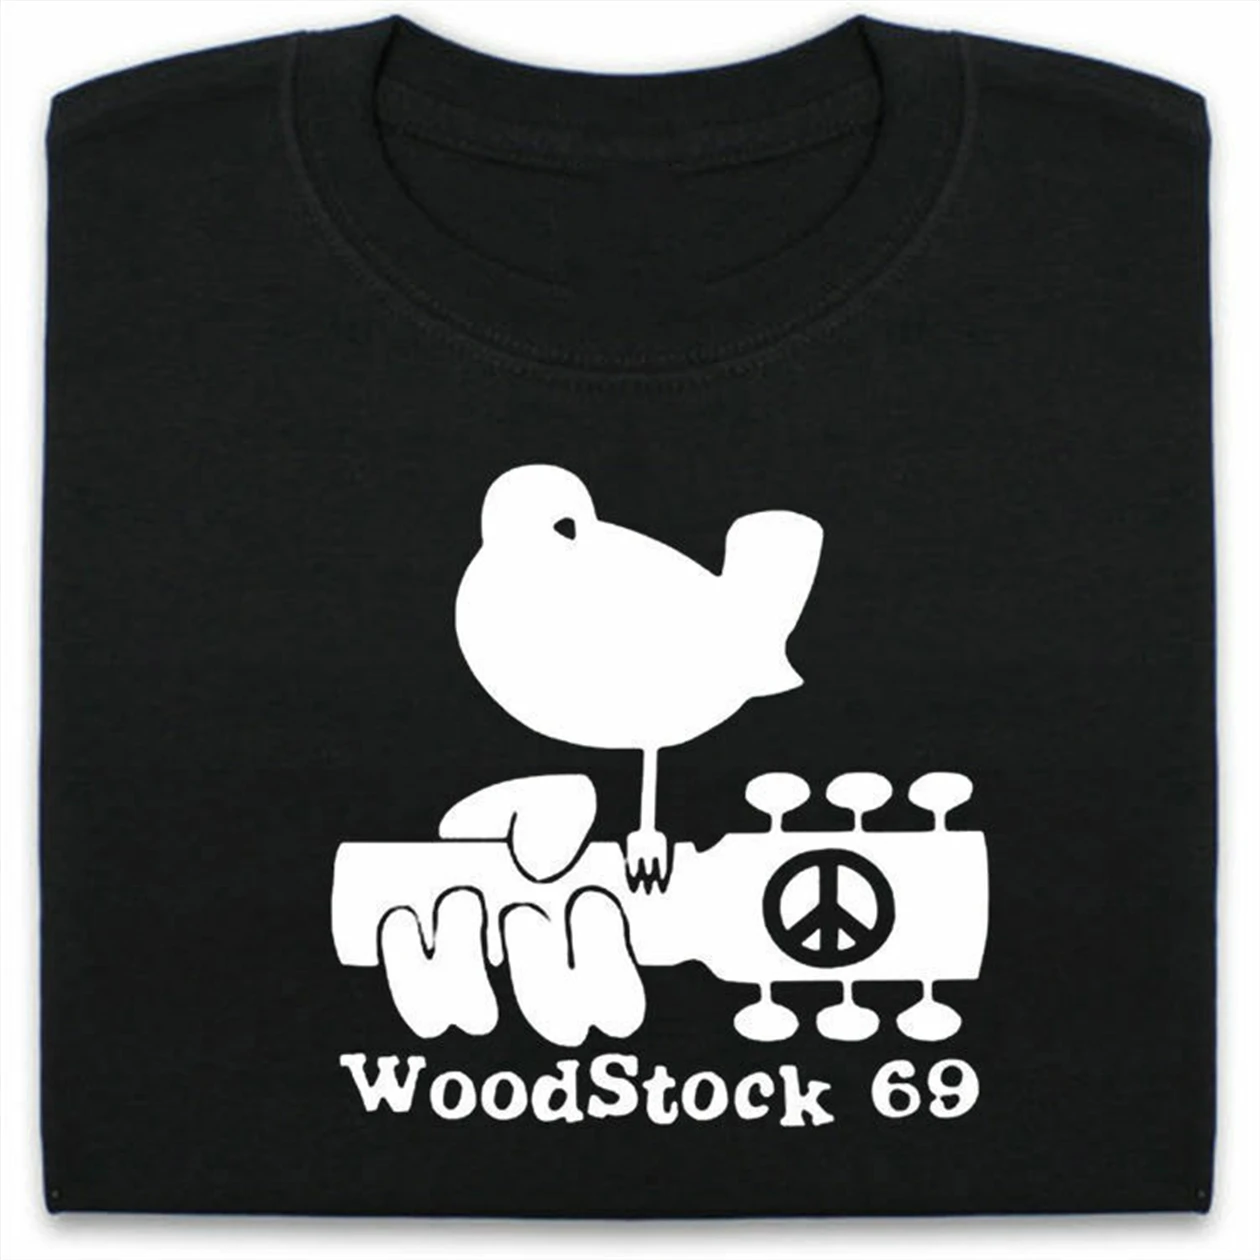 Woodstock peace and music T-Shirt Mens Womens gift Present 